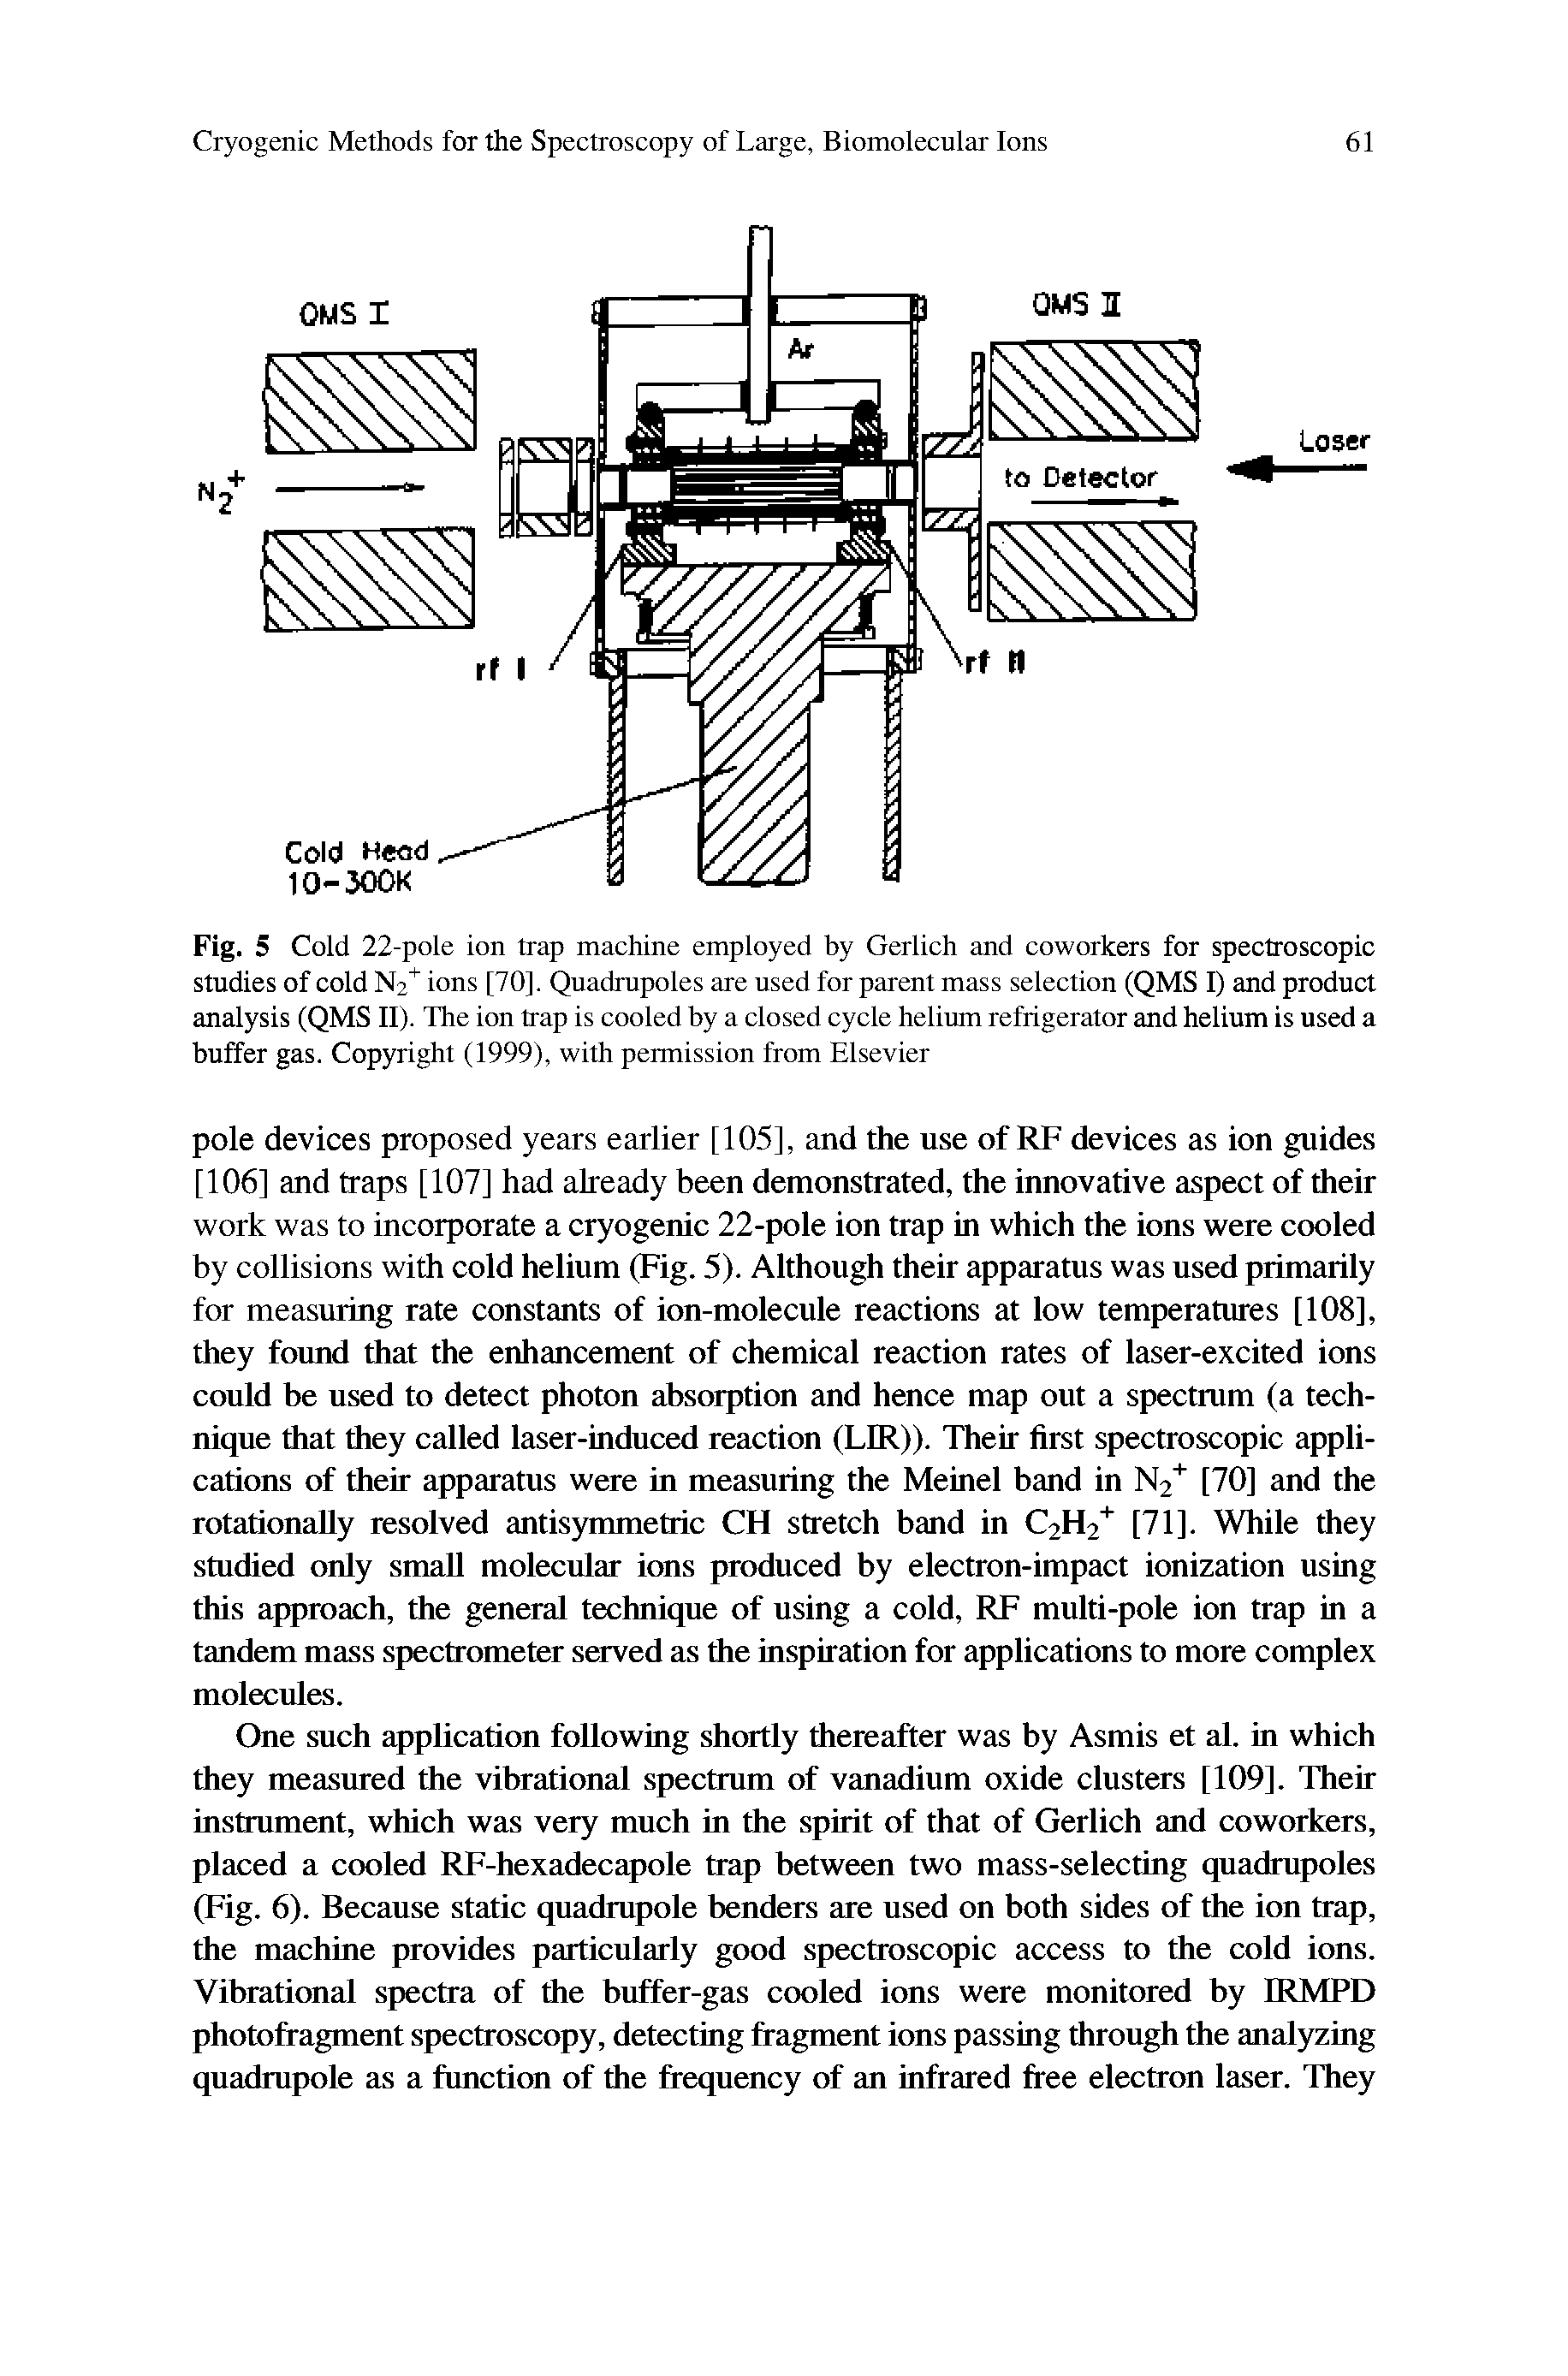 Fig. 5 Cold 22-pole ion trap machine employed by Gerlich and coworkers for spectroscopic studies of cold N2 ions [70]. Quadrupoles are used for parent mass selection (QMS I) and product analysis (QMS II). The ion trap is cooled by a closed cycle helium refrigerator and helium is used a buffer gas. Copyright (1999), with permission from Elsevier...